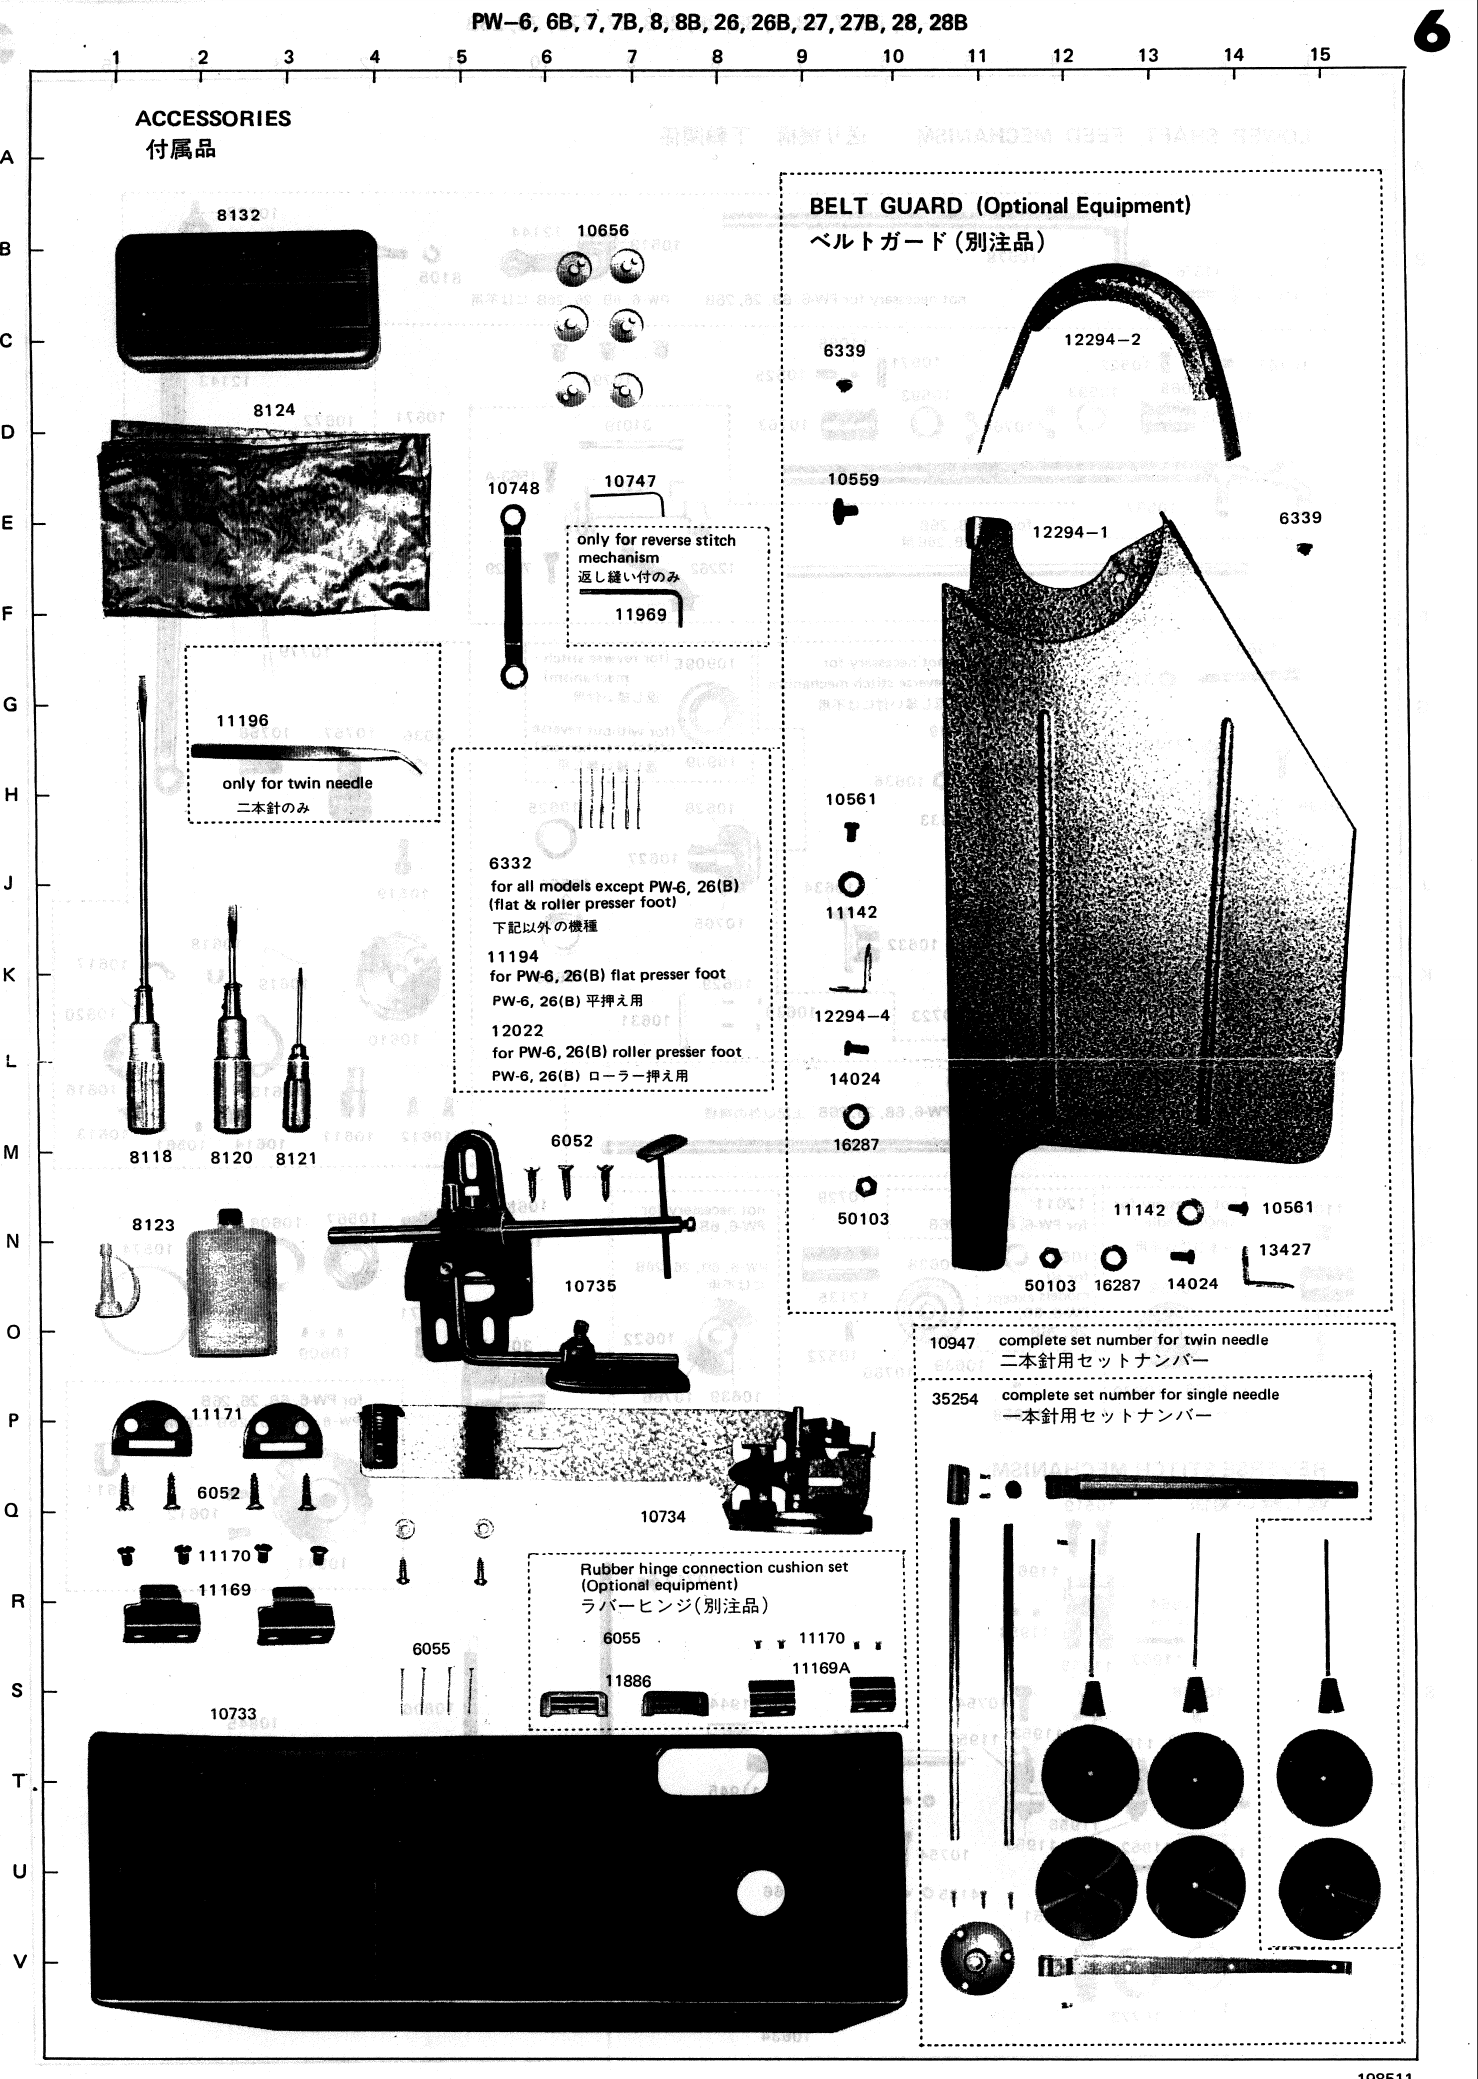 Page 6 of 6 - ACE&EASTMAN Consew 359 Parts Book Image To PDF Conversion Tools User Manual